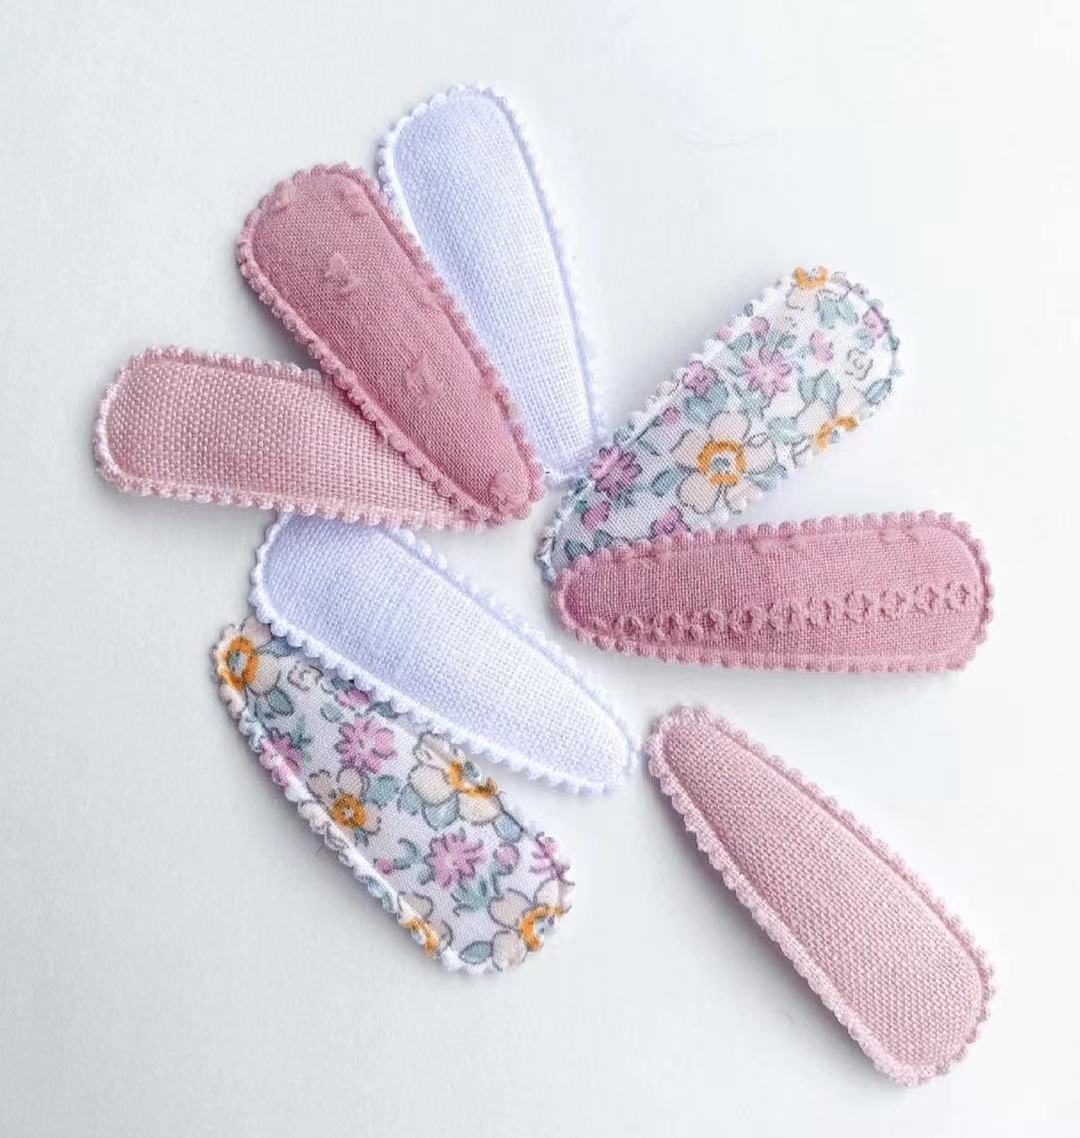 FABRIC SNAP CLIPS - WHITE & PINK EMBROIDERY